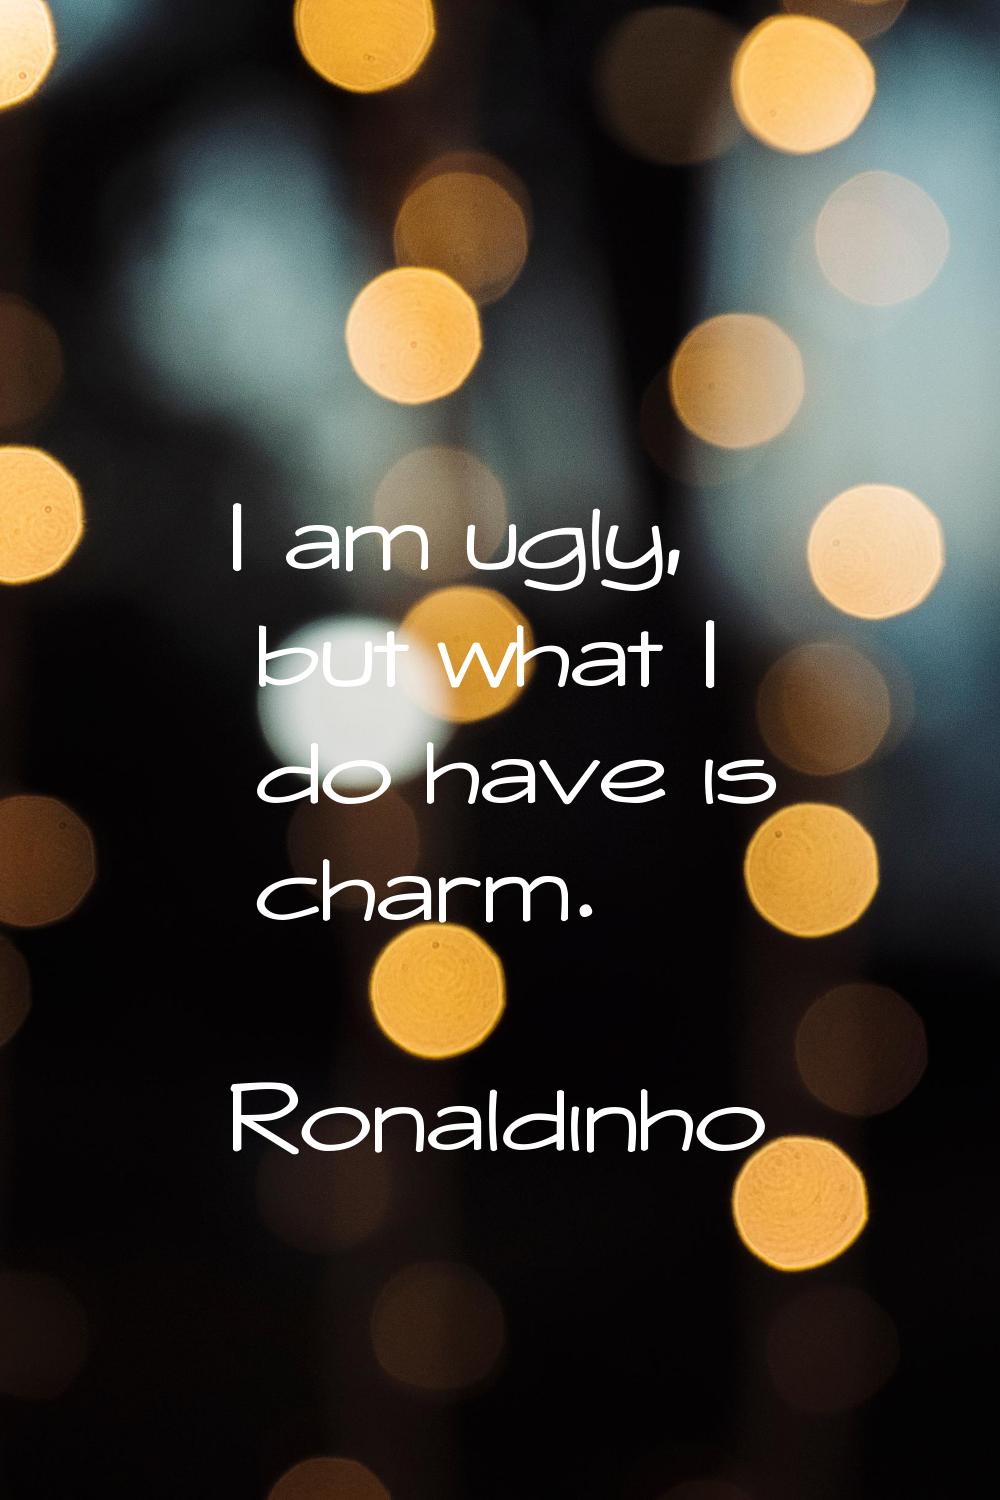 I am ugly, but what I do have is charm.